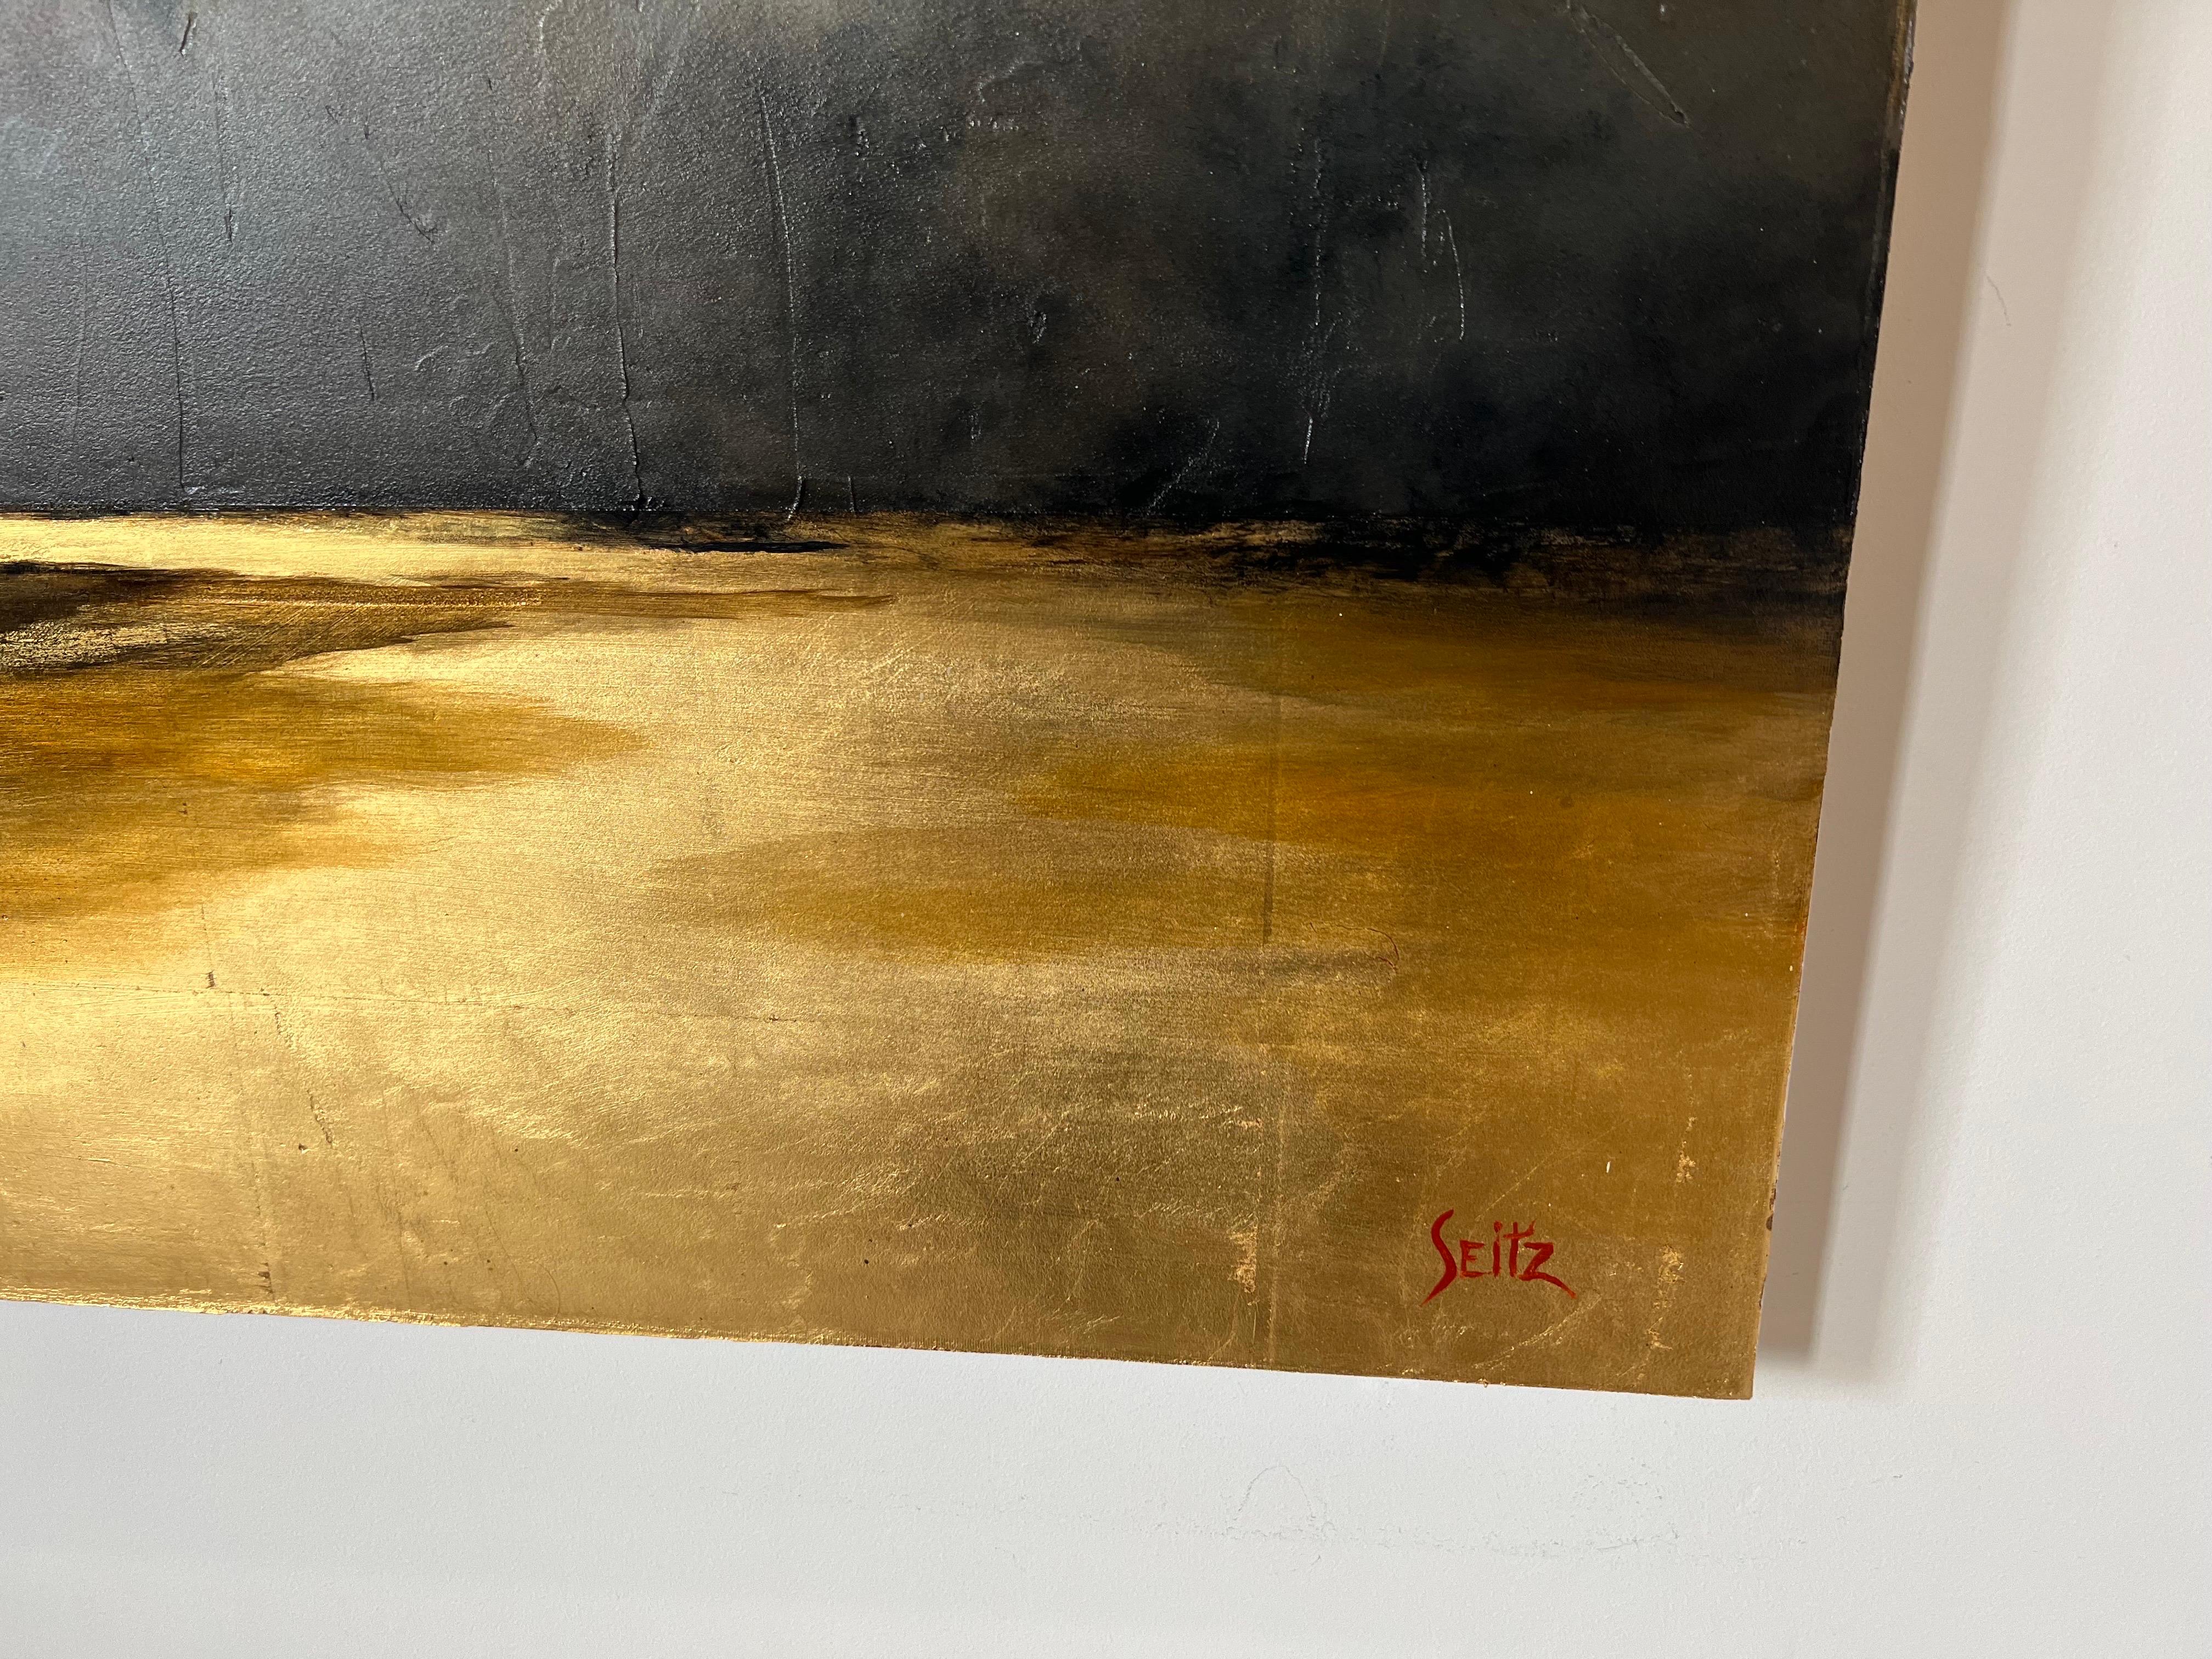 'Remember Me' is a large acrylic and gold leaf on canvas landscape painting of vertical format created by American artist Jim Seitz in 2022. Featuring a gold, grey, peach and blue palette, the painting gives great importance to the sky with a tree